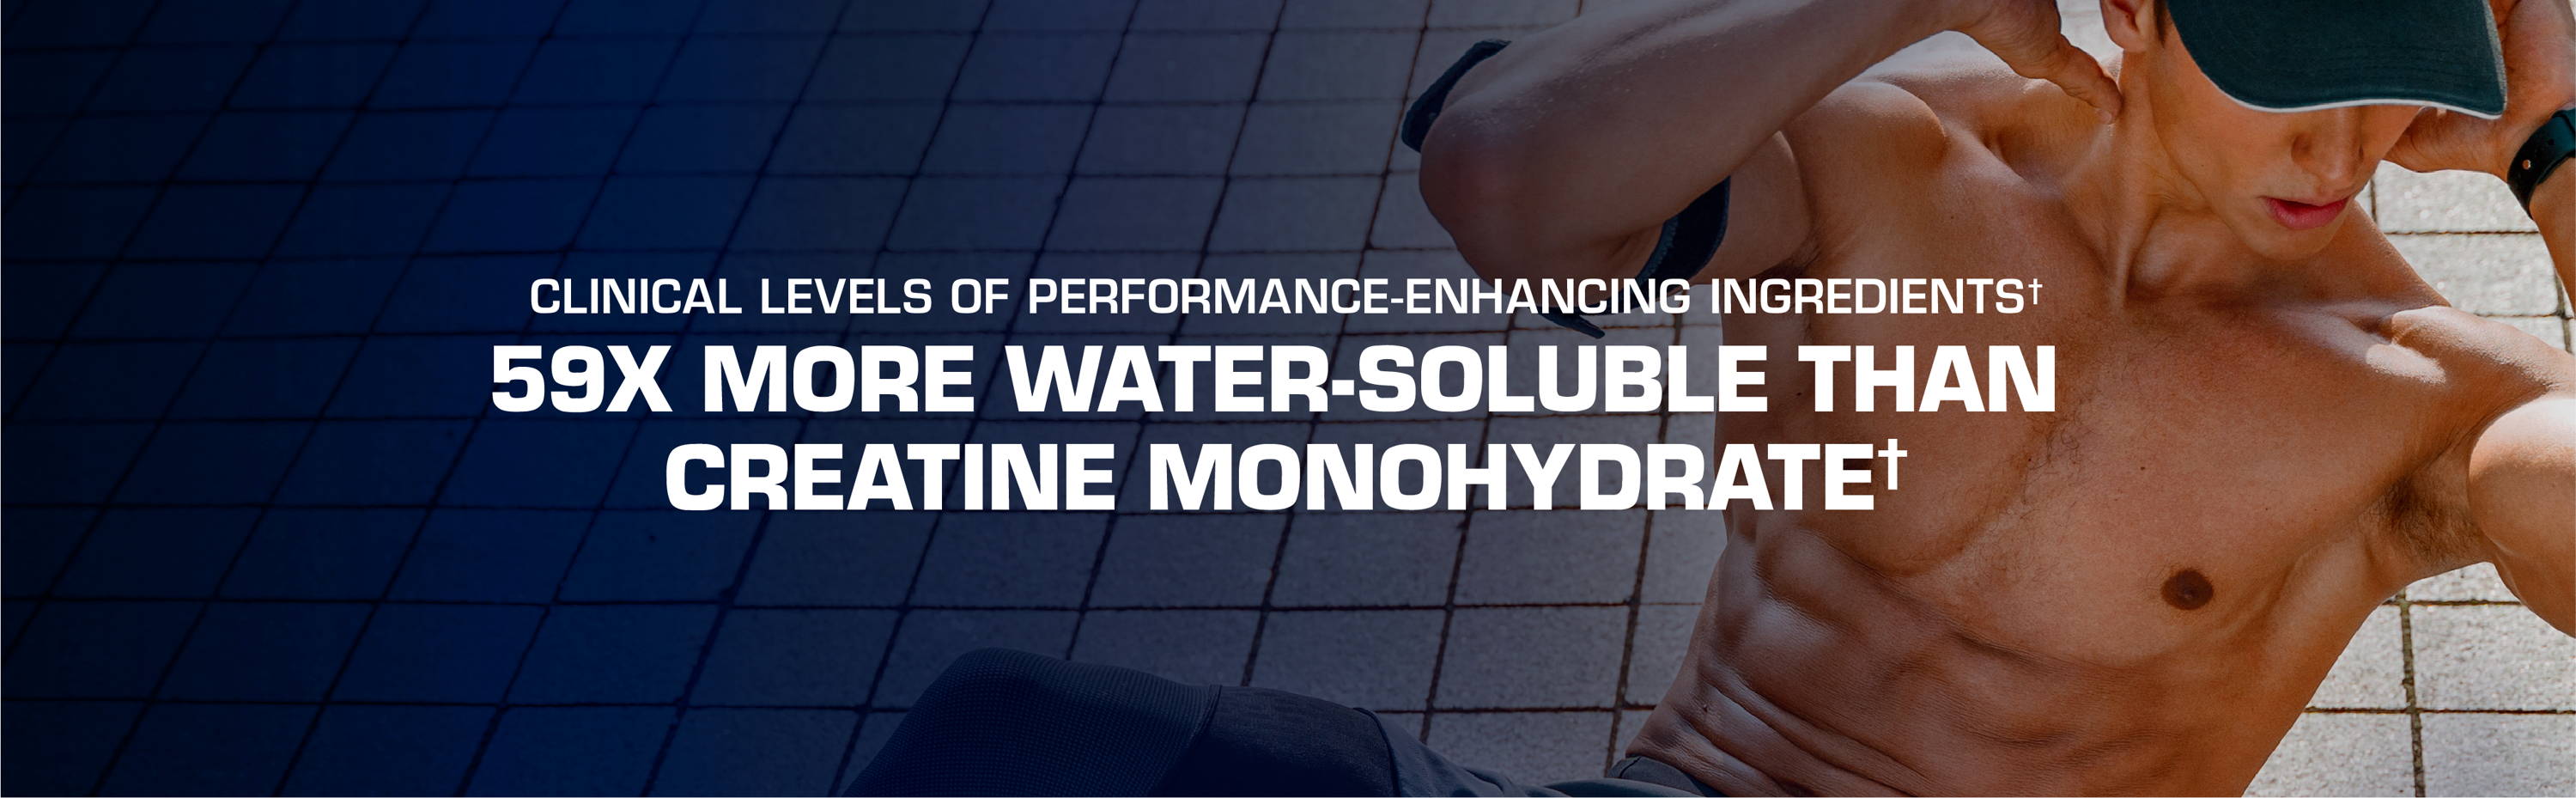 59x more water-soluble than creatine monohydrate*